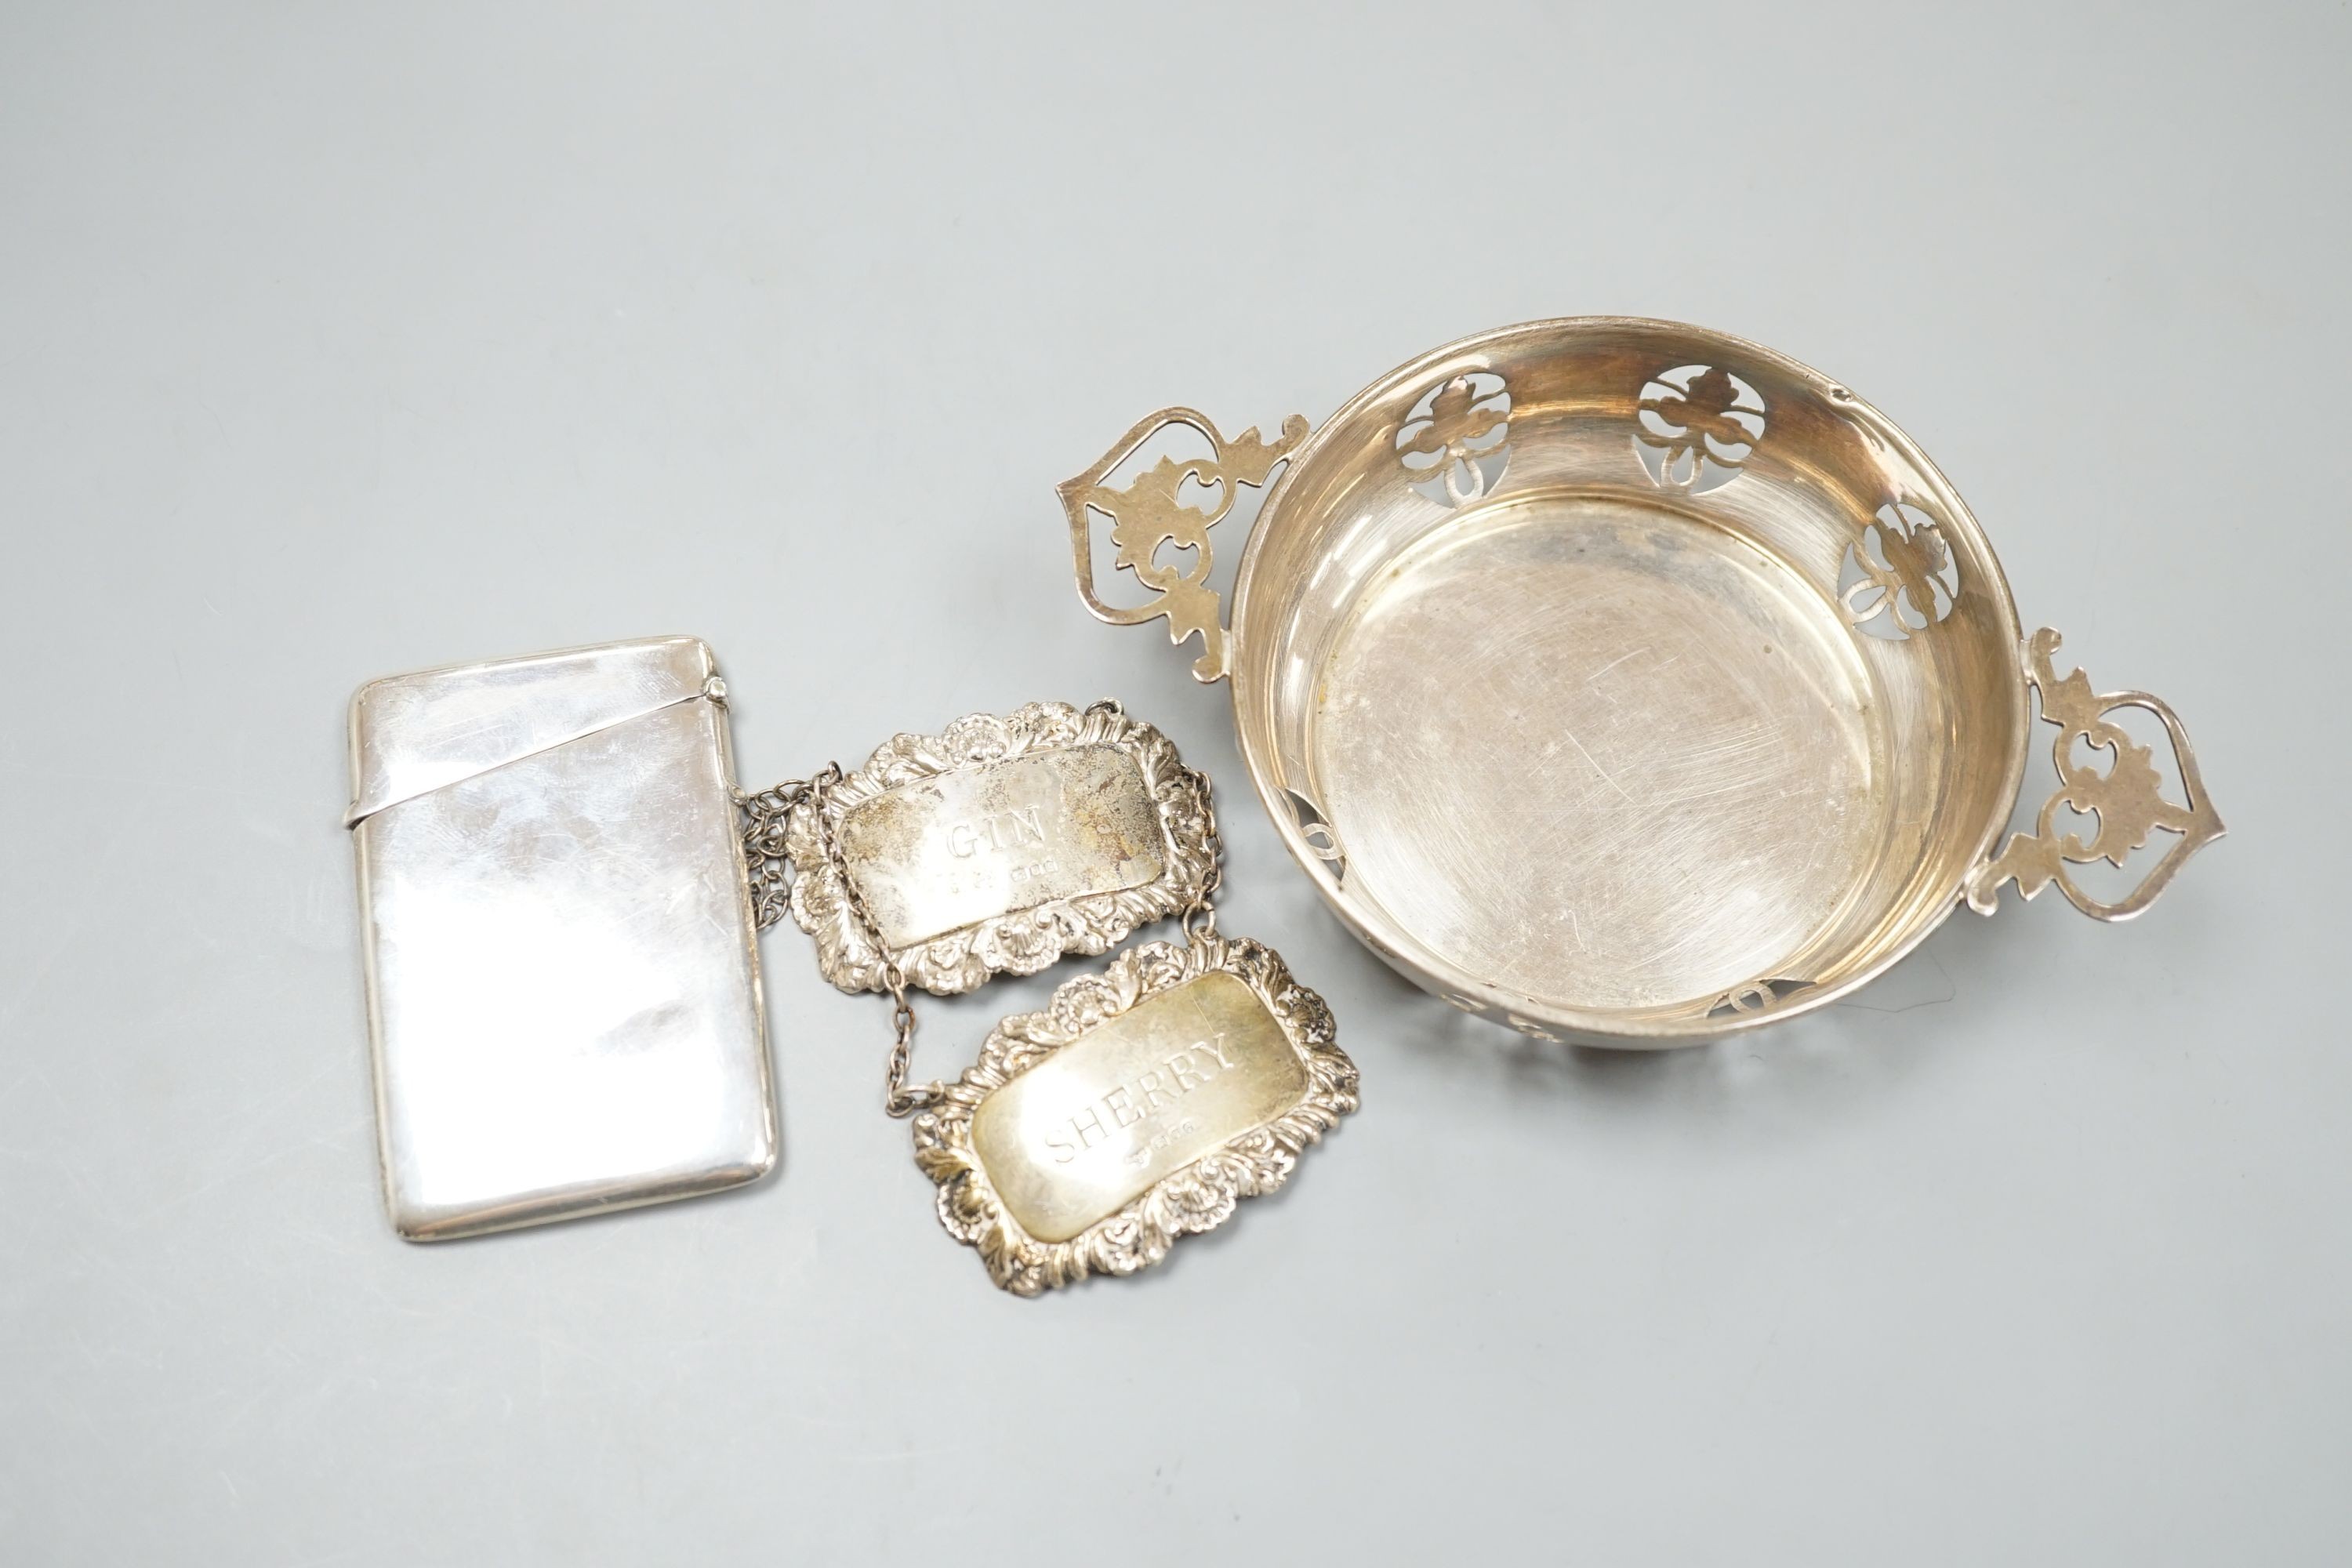 A circular sweetmeat with pierced sides and lug handles, Birmingham 1954, 10.75cm diameter, a plain rectangular card case, Birmingham 1914 and two modern silver wine labels, Gin & Sherry.